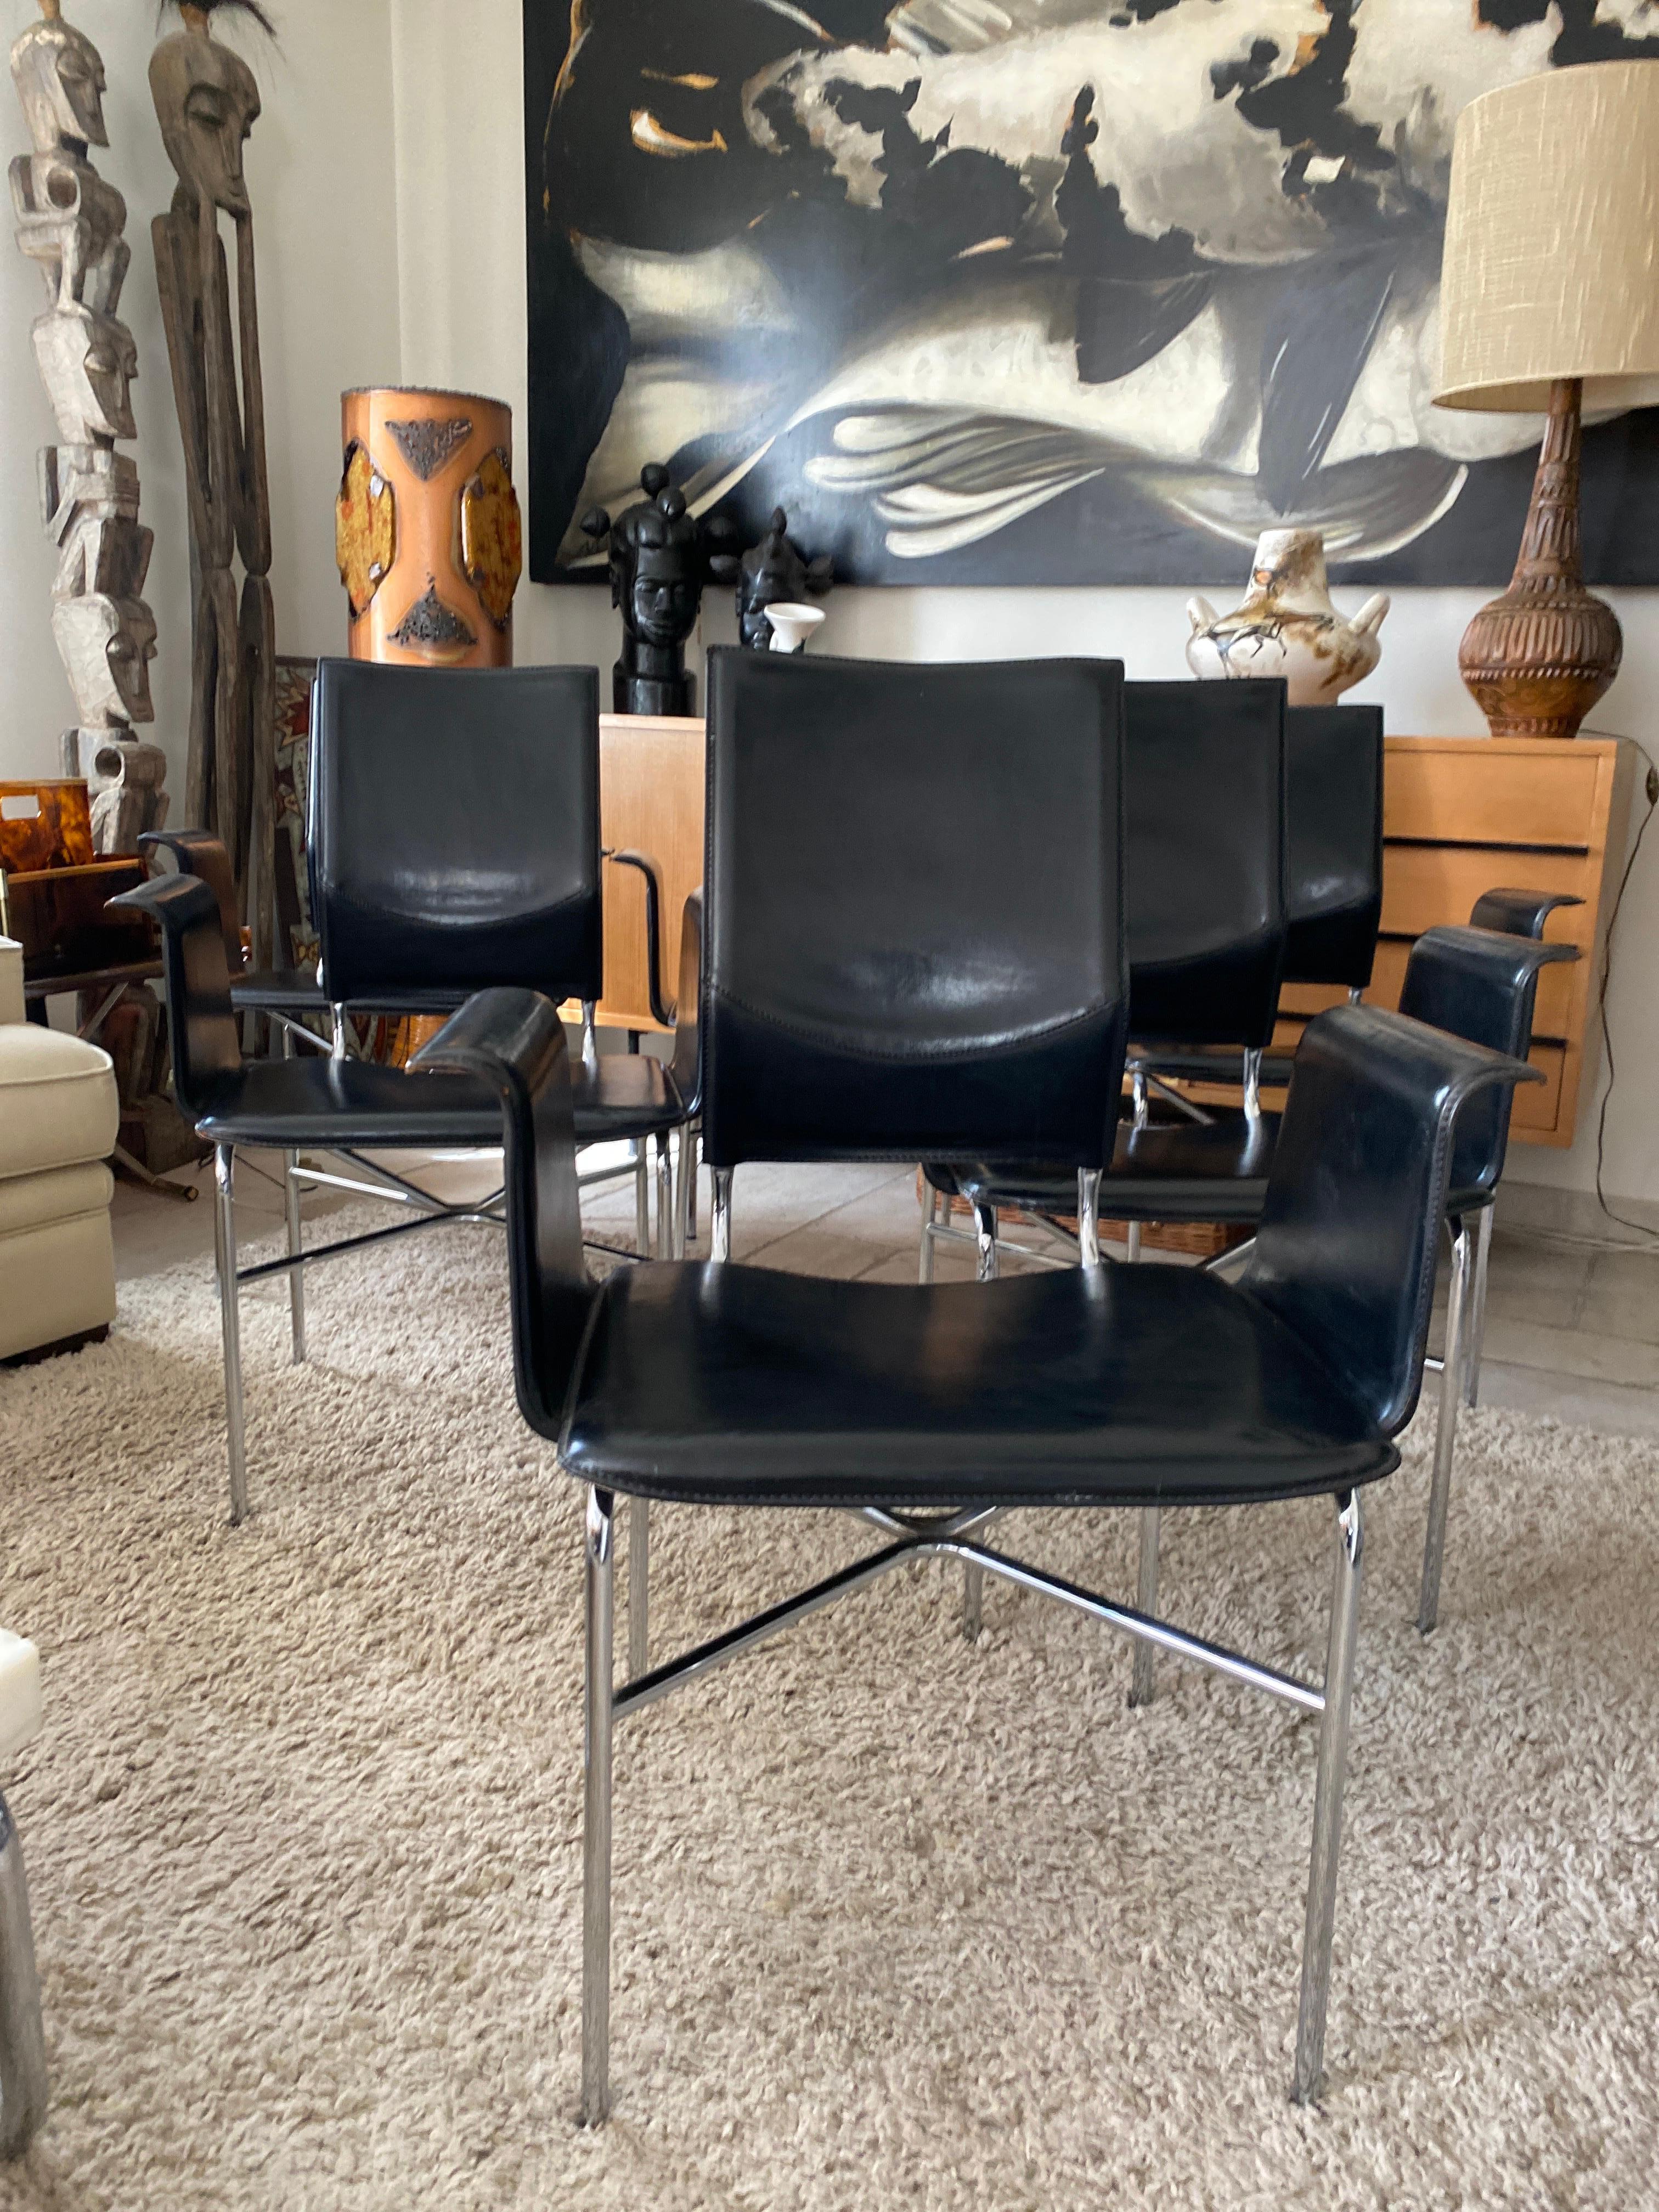 Set of 6 Matteo Grasssi, Ross Littel 1980 armchairs in black leather and chrome steel structure. These armchairs were designed by the American designer Ross Littell (1924-2000) for Matteo Grassi. Measures: Seat height: 46 cm.